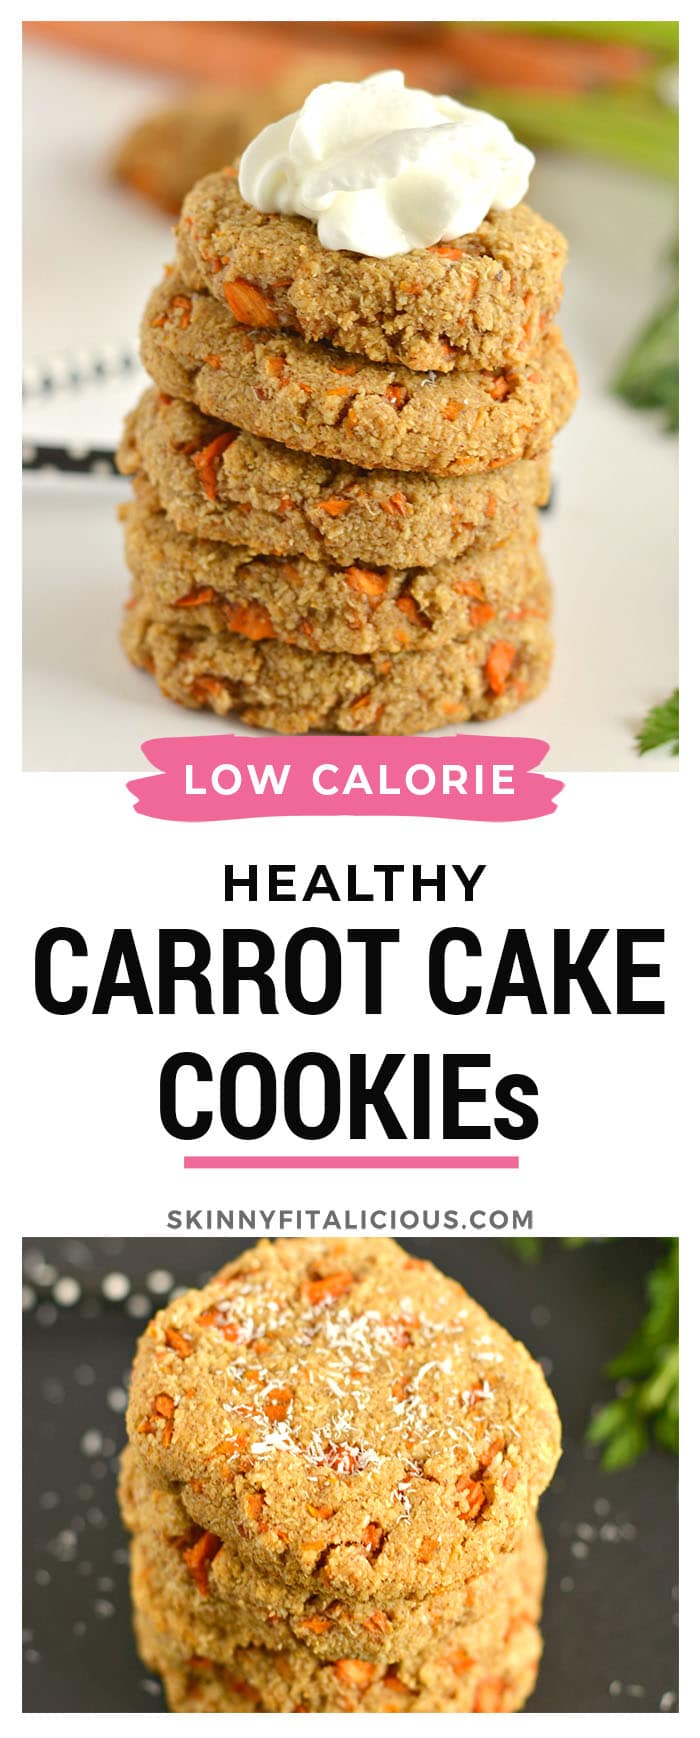 Paleo Carrot Cake Cookies taste like carrot cake and take just 15 minutes to make! Made with almond flour, carrots, coconut and cinnamon and no no refined oil or sugar these cookies are grain free, gluten free, Paleo and Vegan with a low calorie option too. 